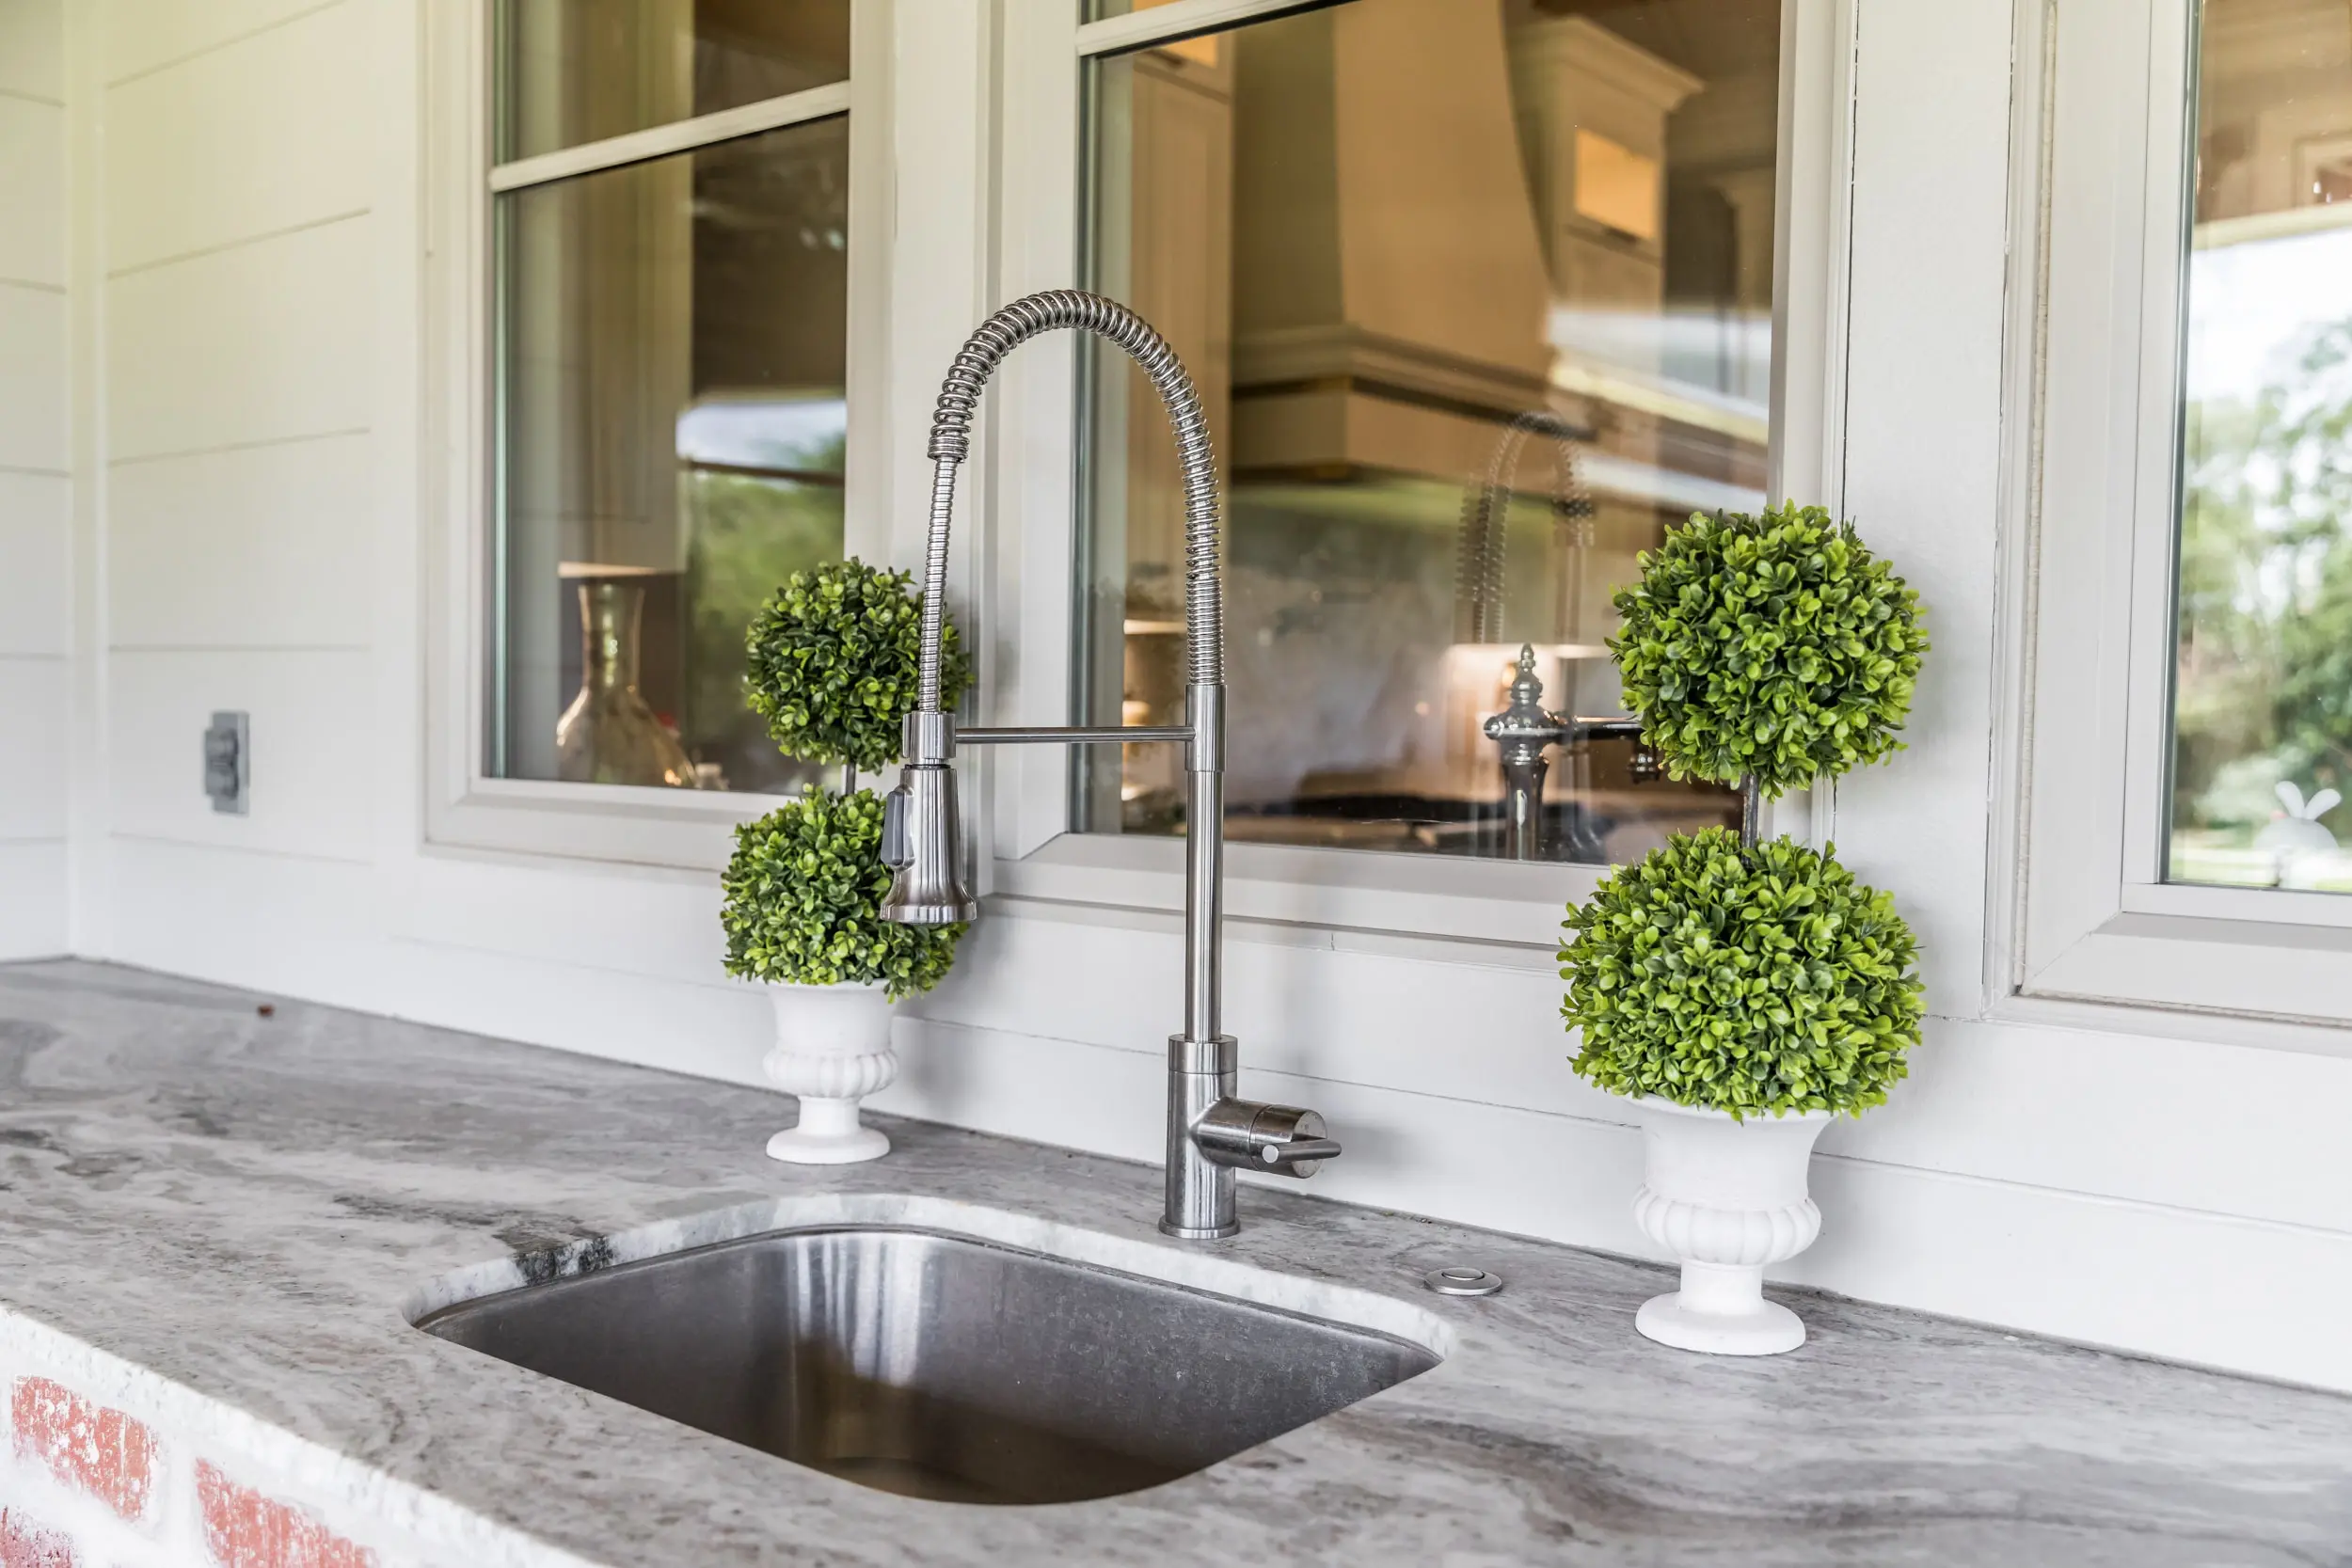 How To Winterize An Outdoor Sink